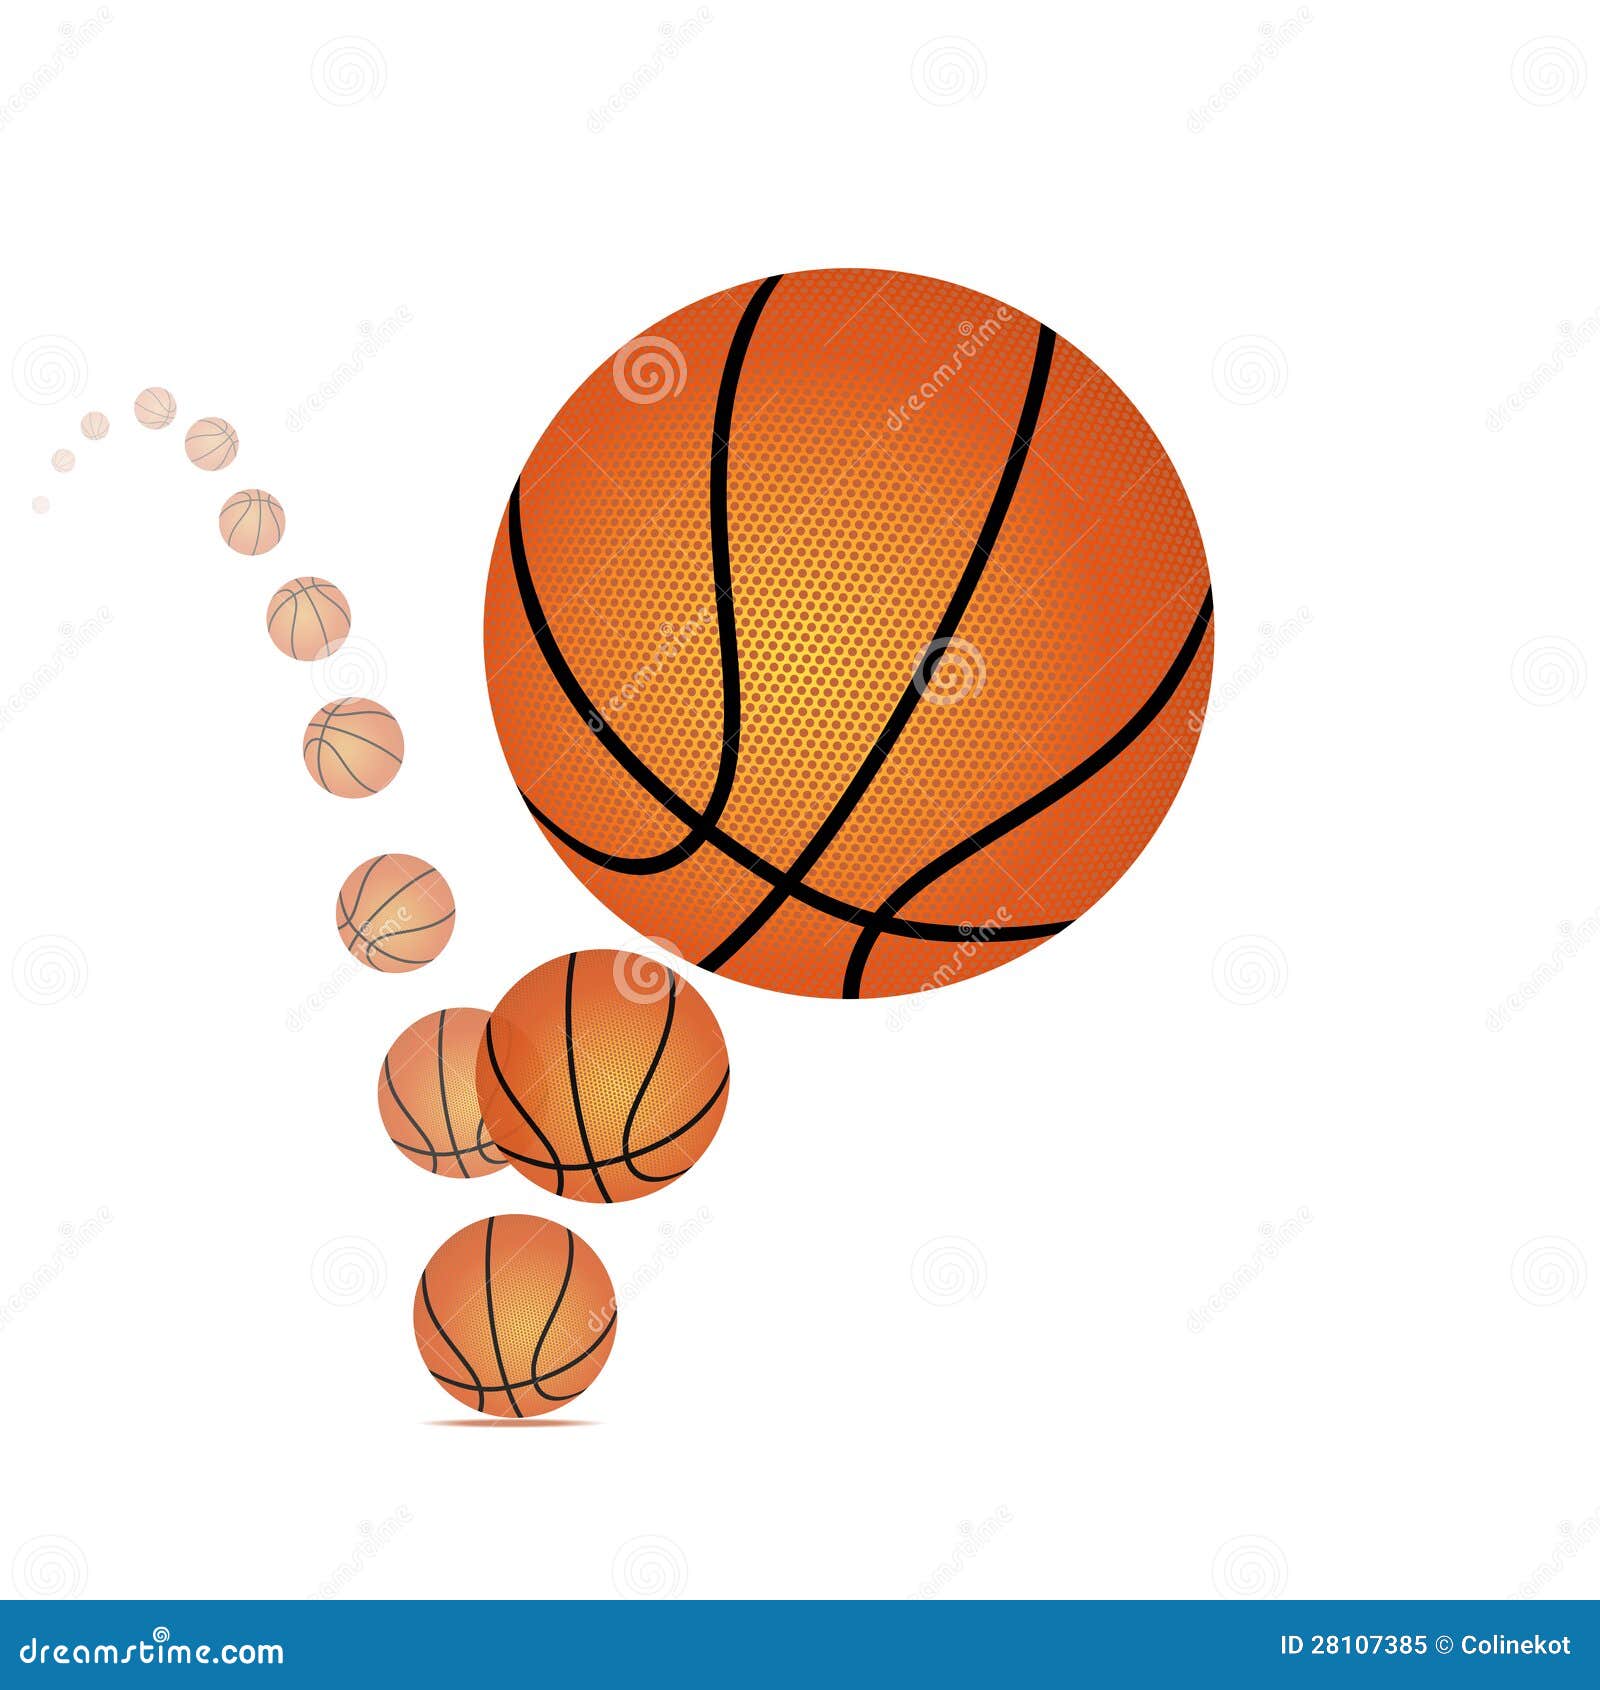 basketball game clipart - photo #41